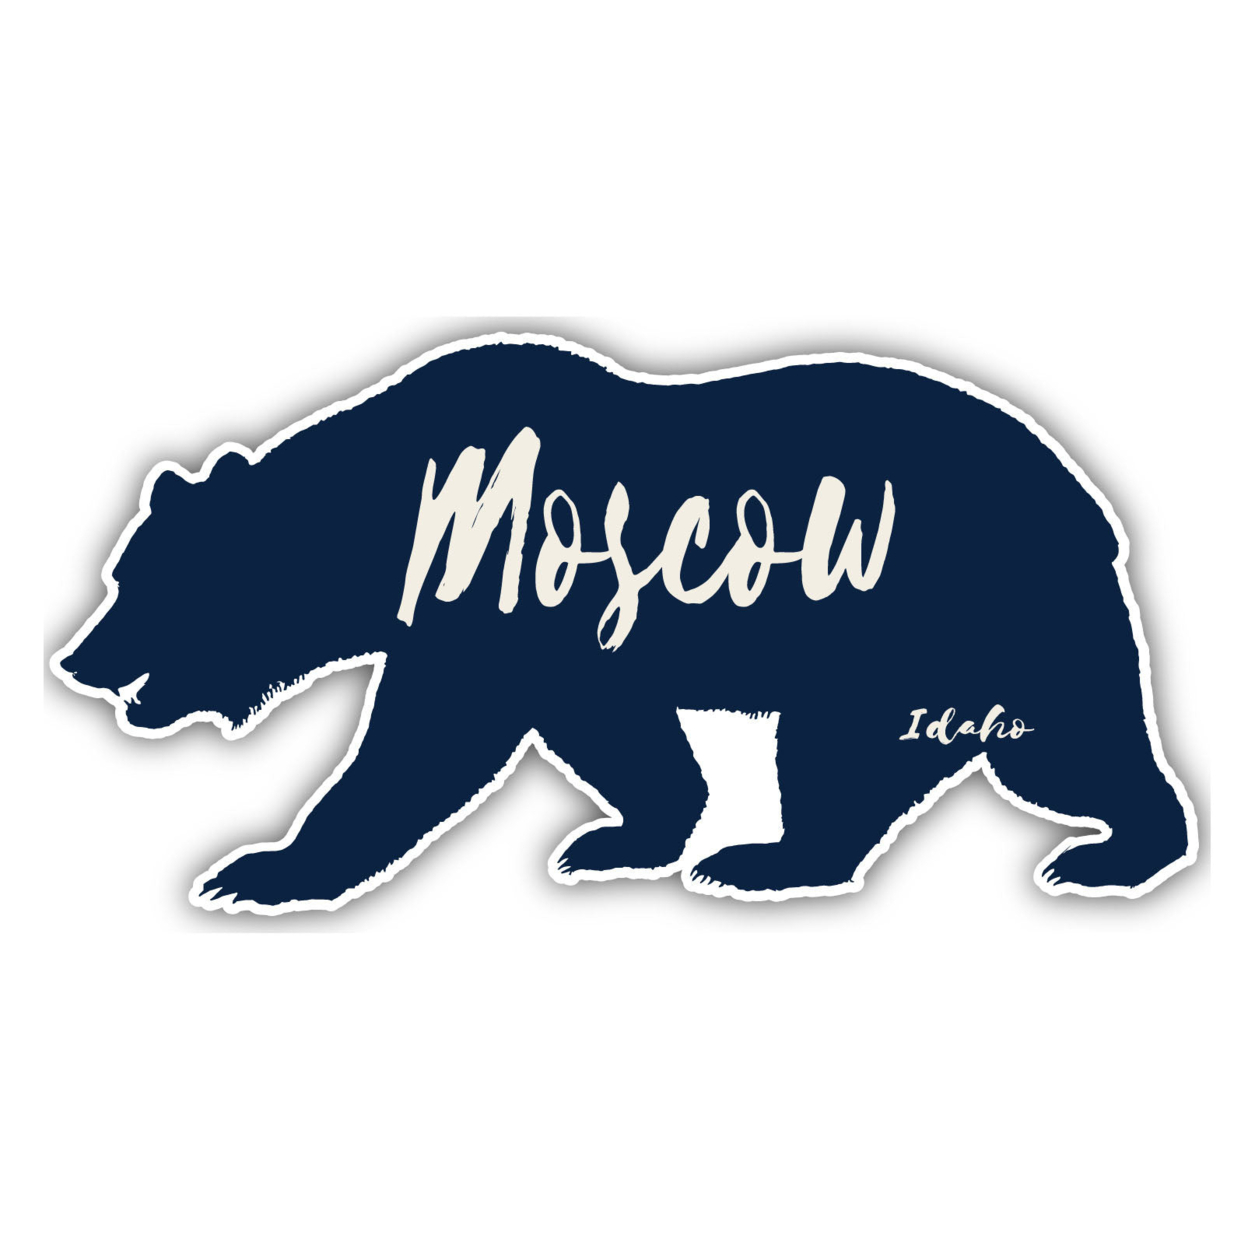 Moscow Idaho Souvenir Decorative Stickers (Choose Theme And Size) - Single Unit, 2-Inch, Bear